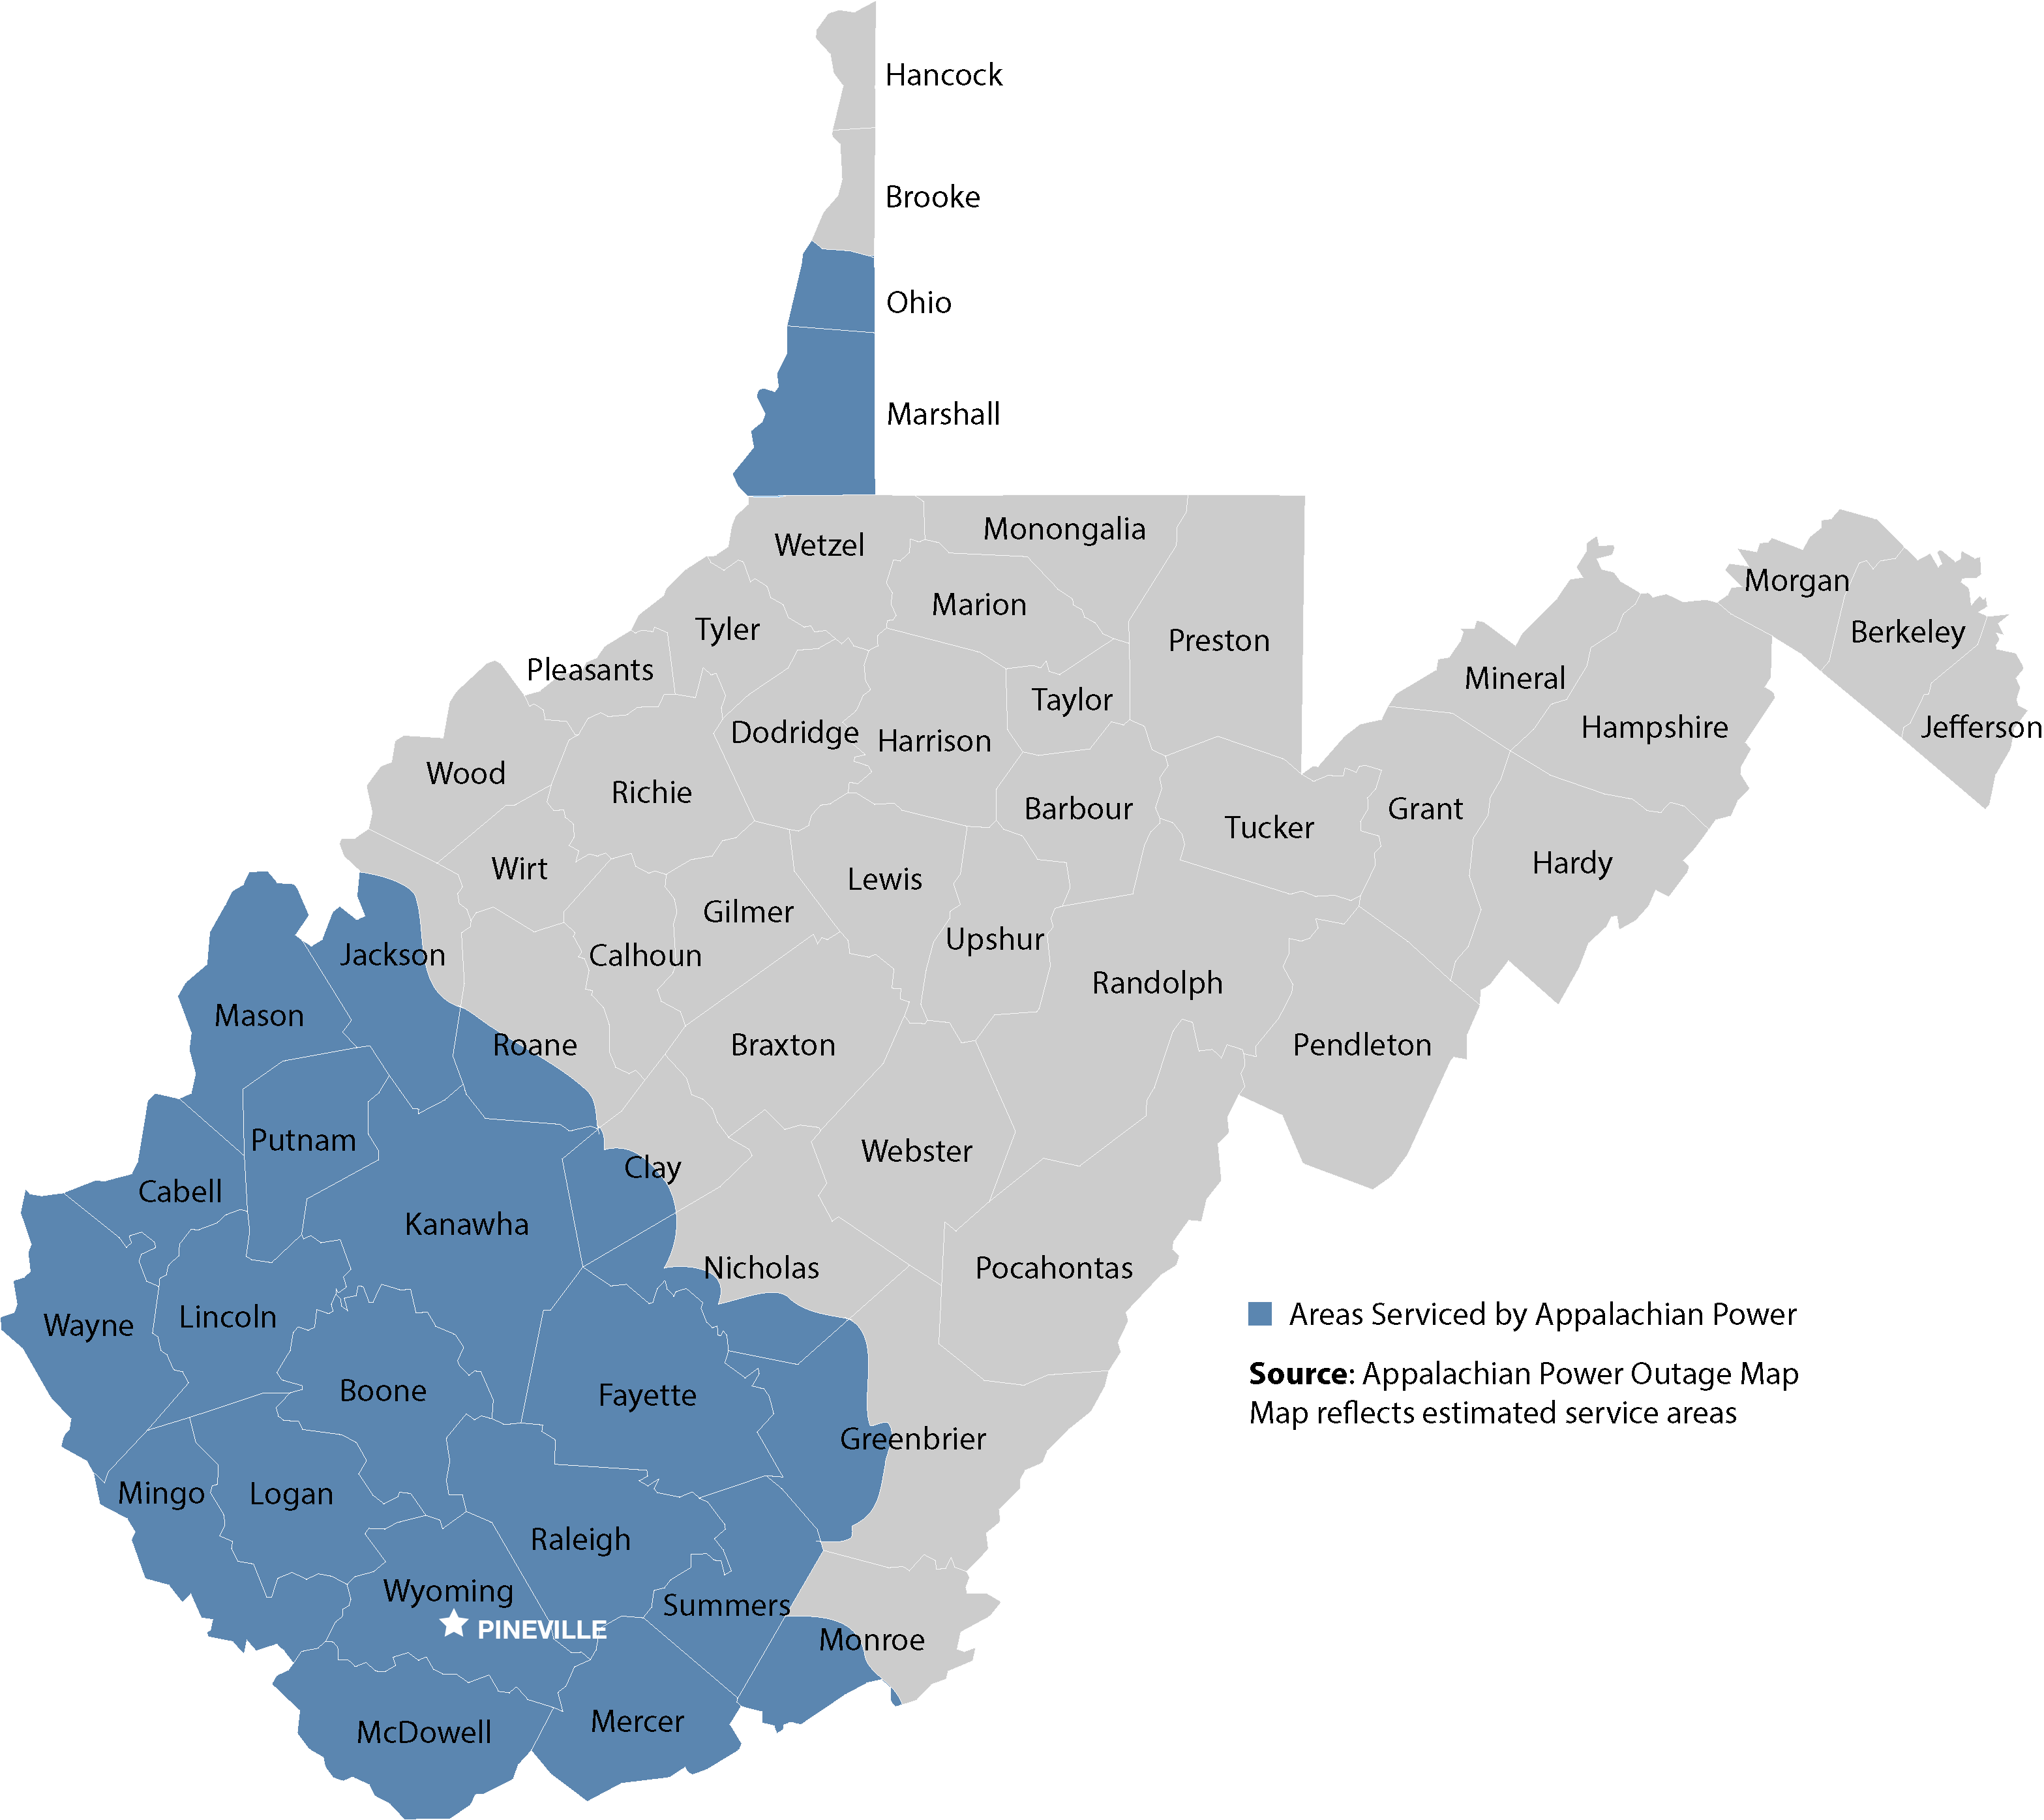 29-aep-power-outage-map-wv-maps-online-for-you